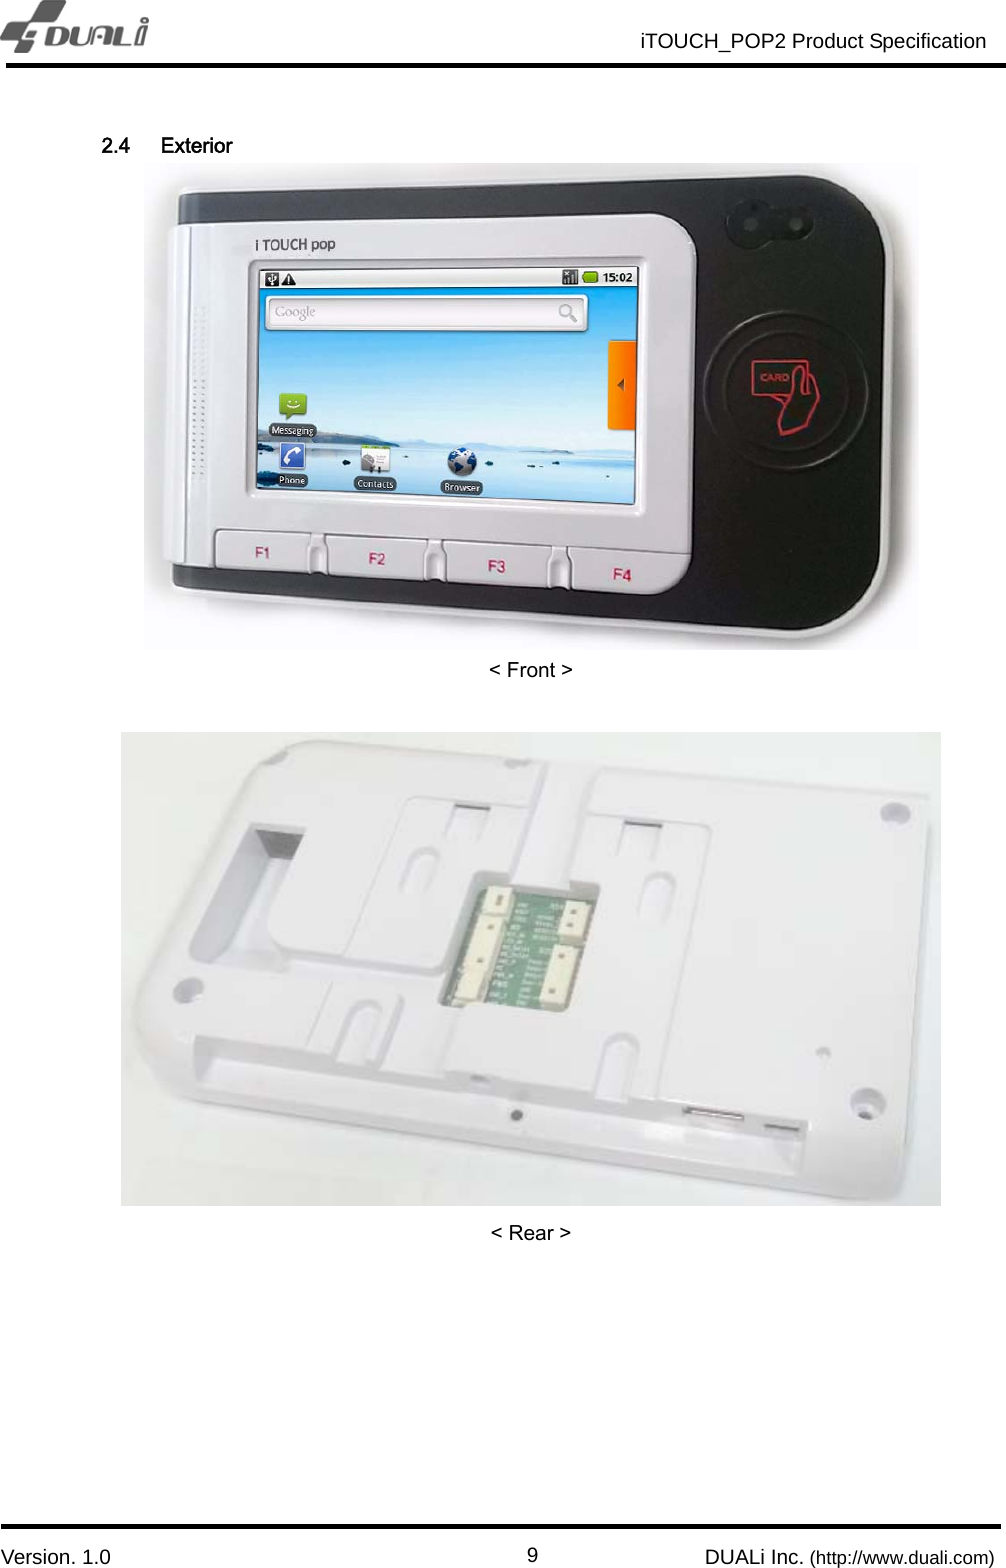                                                          iTOUCH_POP2 Product Specification                          `  Version. 1.0                                                         DUALi Inc. (http://www.duali.com)  92.4 Exterior  &lt; Front &gt;   &lt; Rear &gt;       